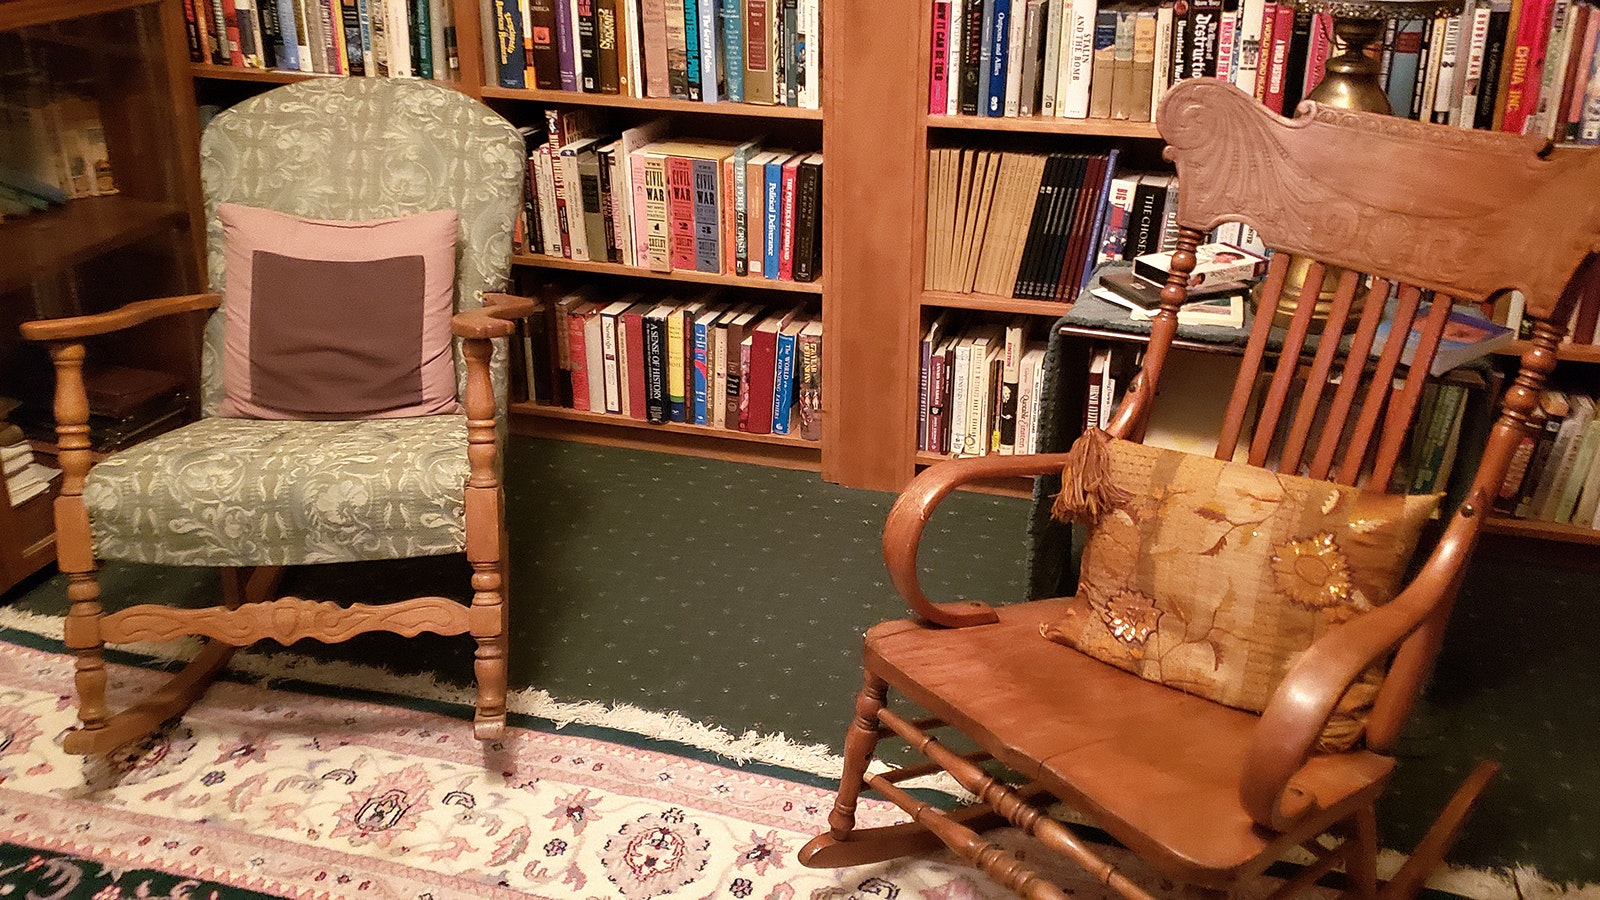 In addition to the Herbert Hoover couch there are rocking chairs to sit in and read in the hotel library.